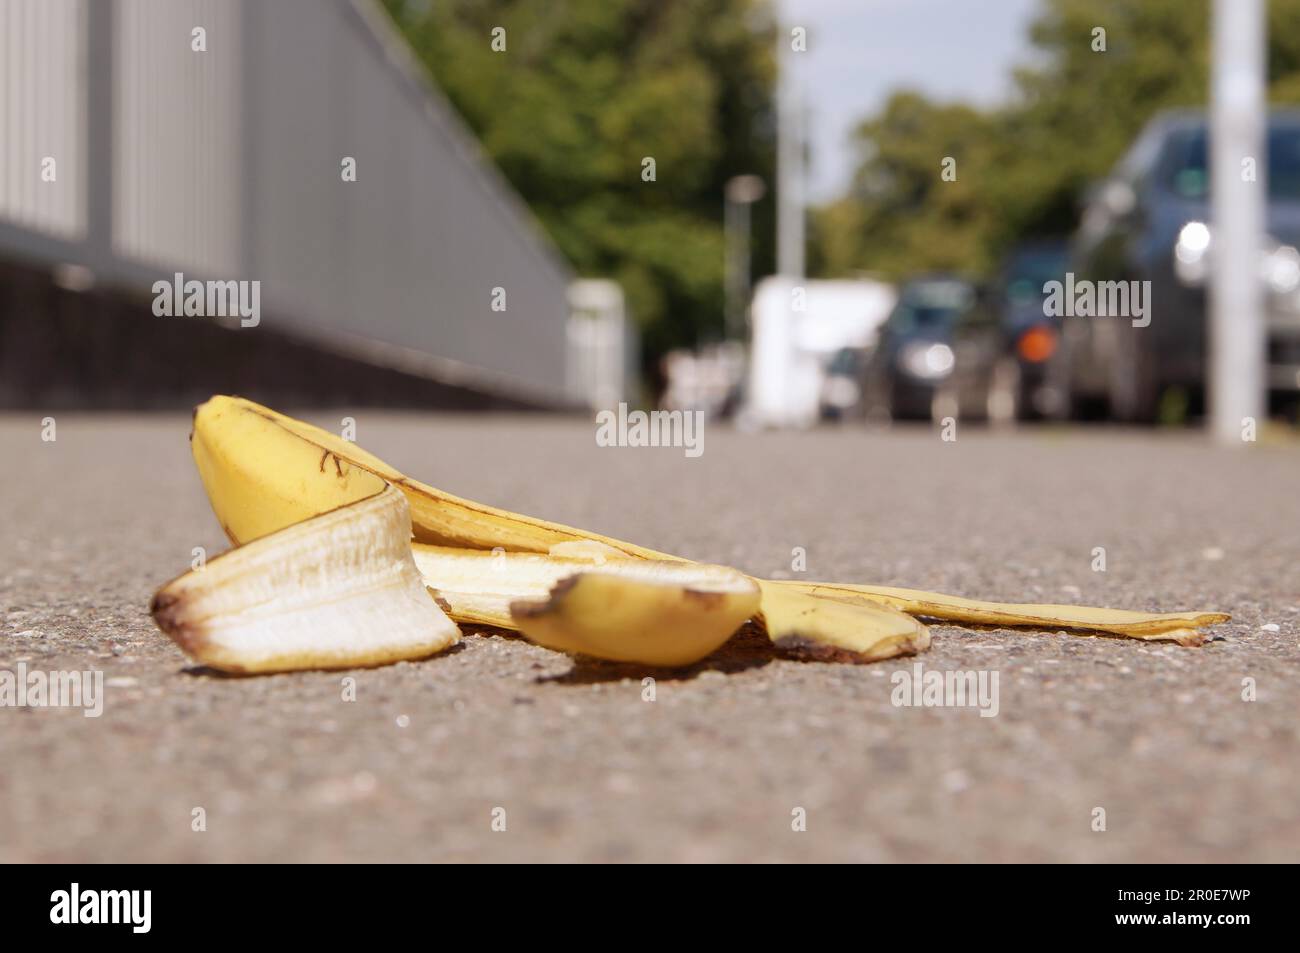 discarded banana skin lying on pavement with selective focus Stock Photo